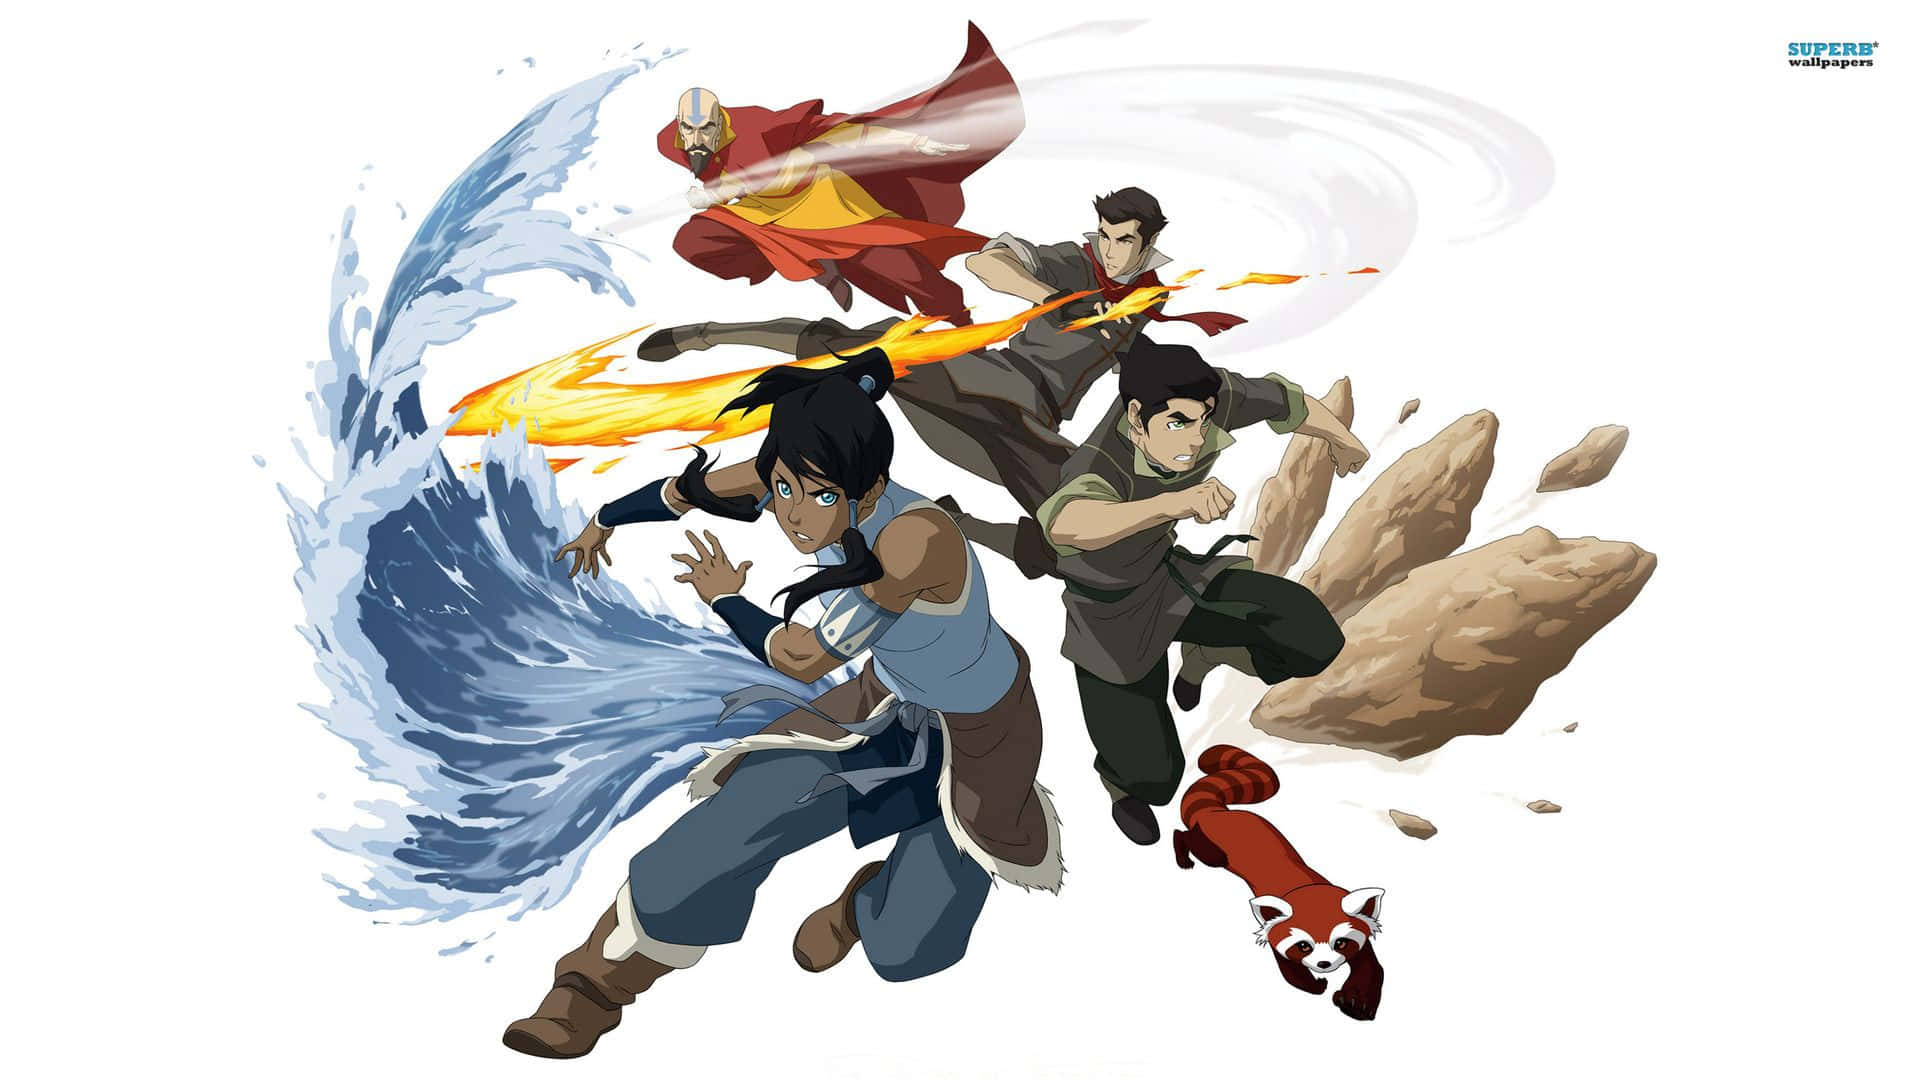 Korra Stands Tall As The Avatar, Ready To Defend The World Of Balance.